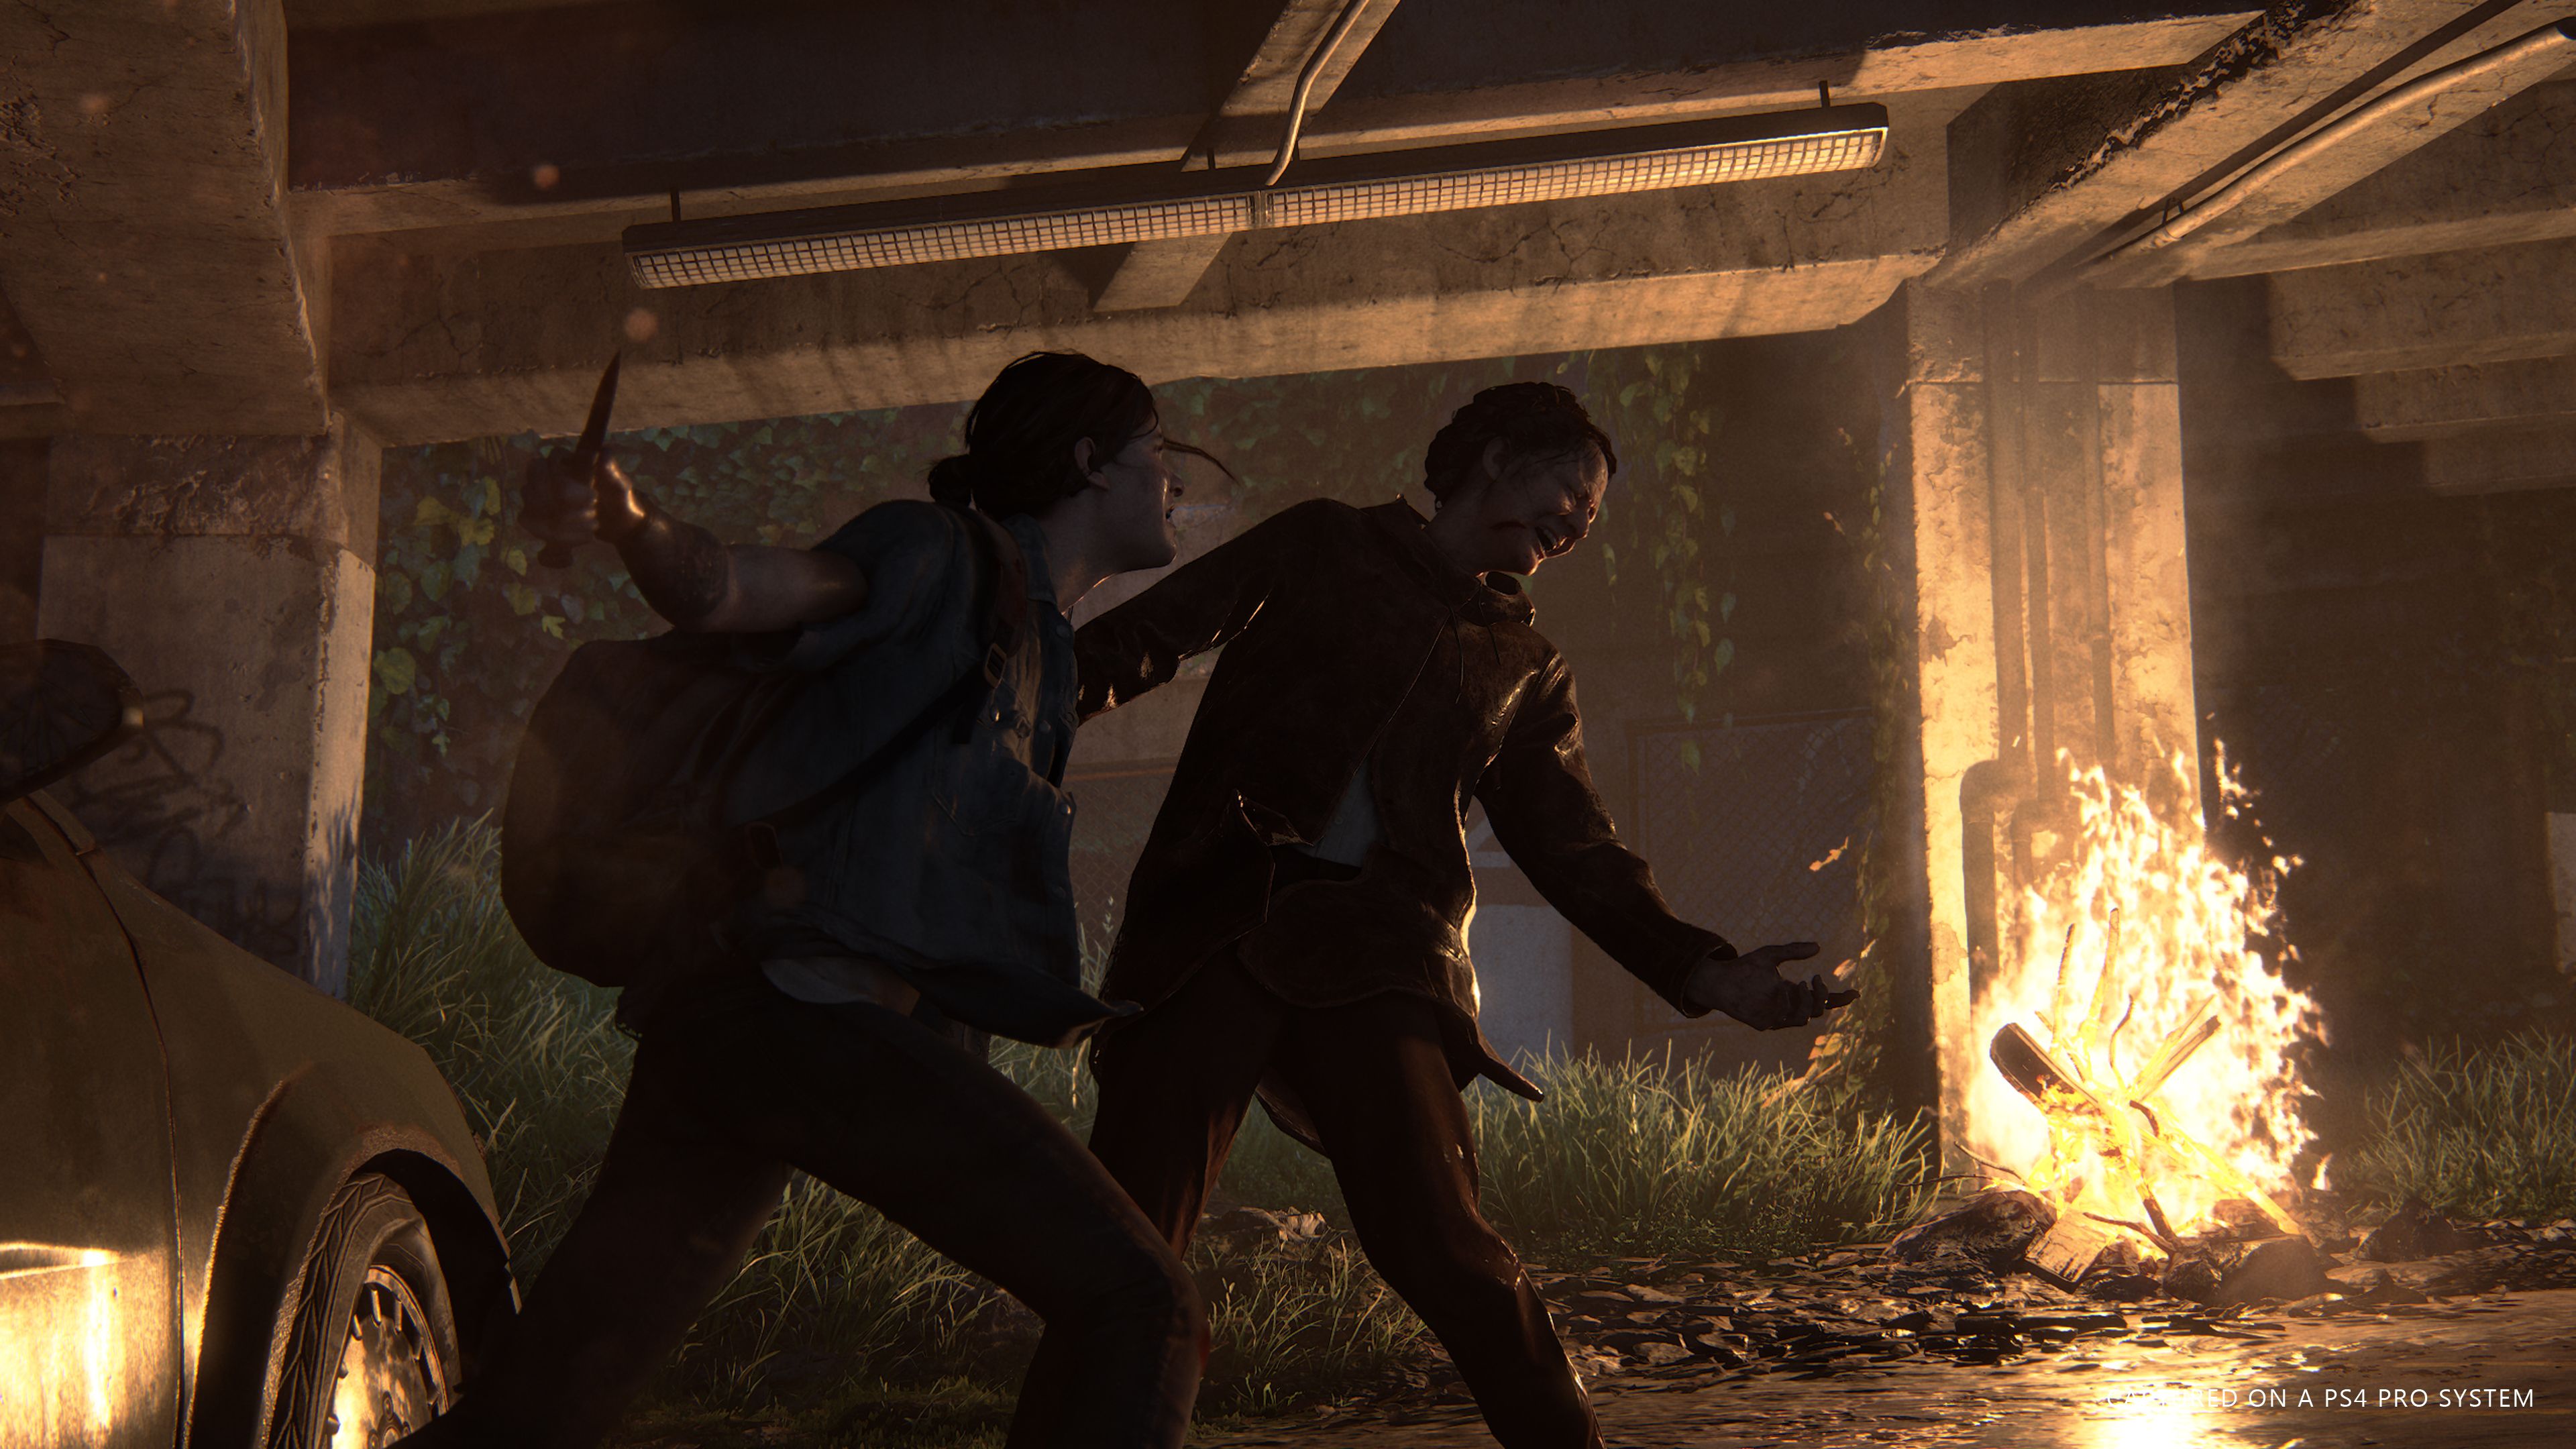 The Last of Us Multiplayer Game Has Been Cancelled, Naughty Dog Confirms:  Here's Why - News18